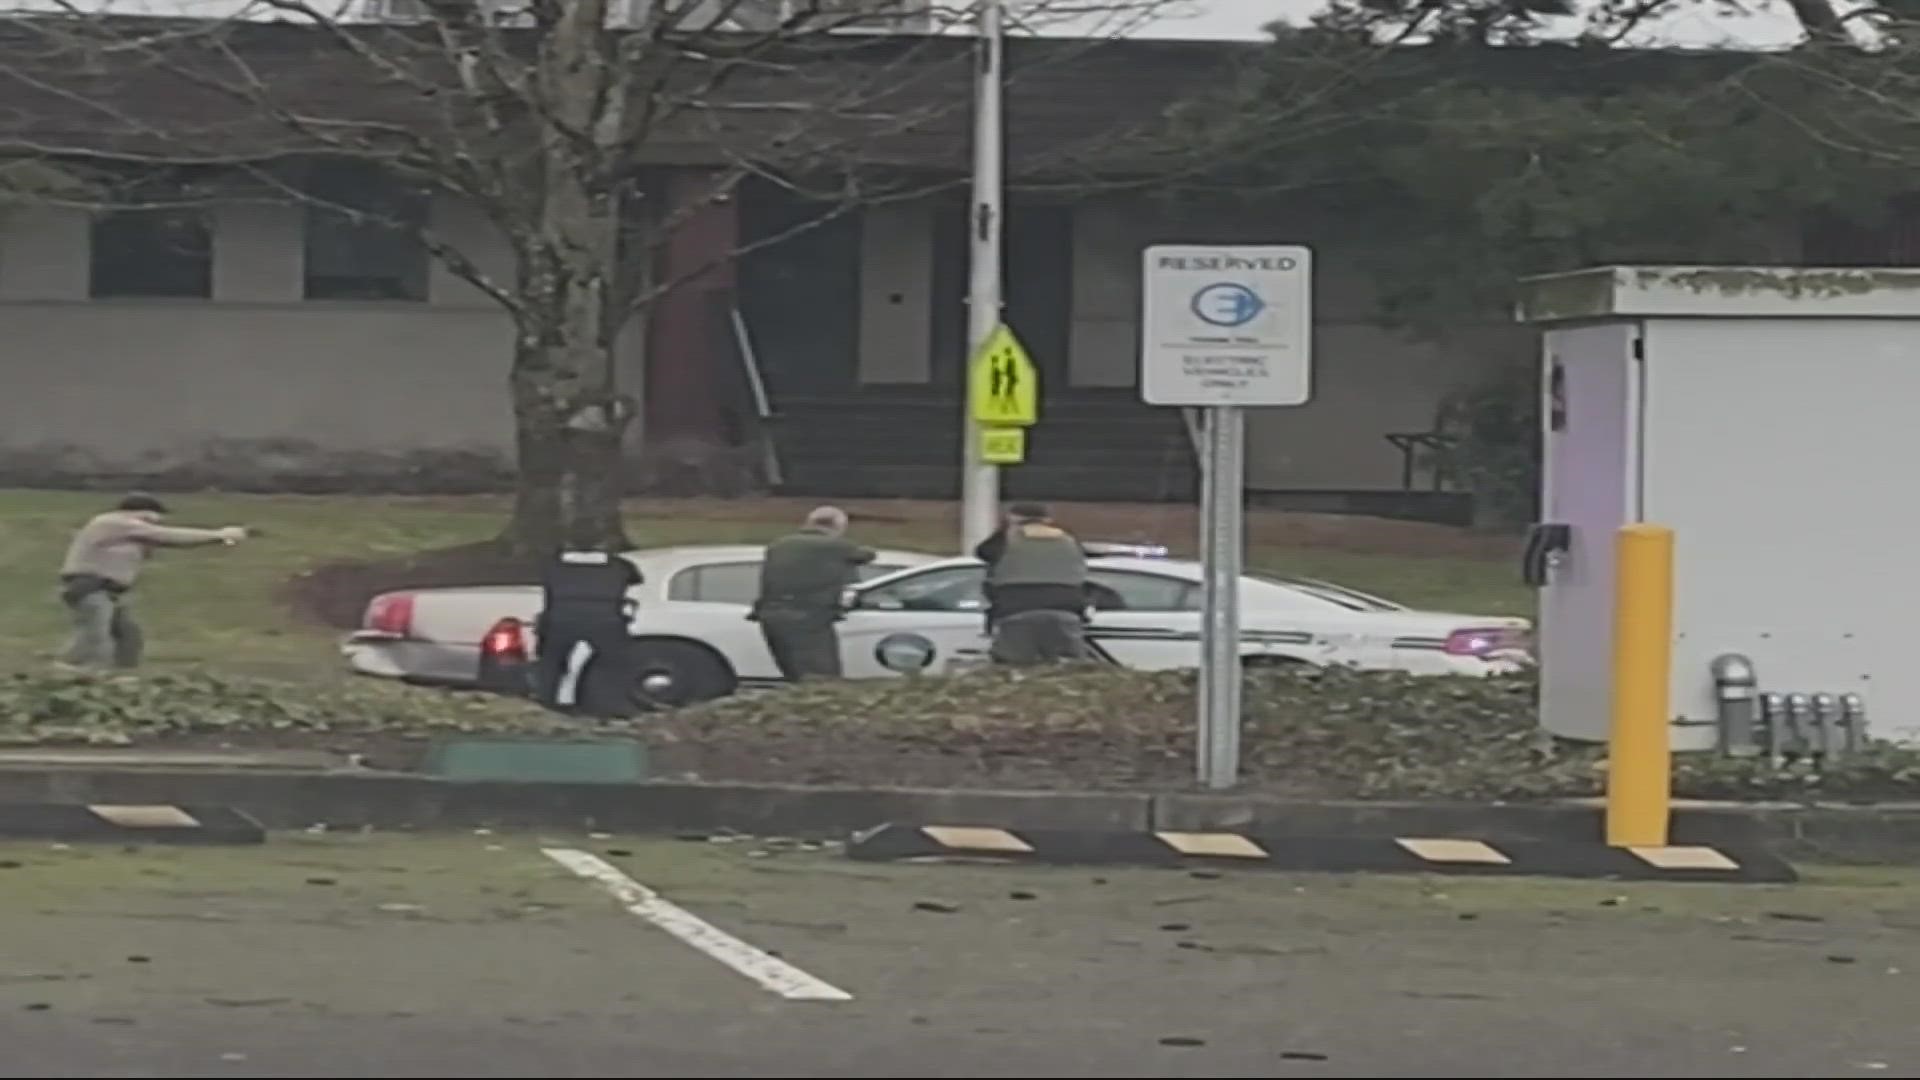 Video captured at the scene shows the moment when Clackamas County deputies and Wilsonville police opened fire at a car with two people inside.